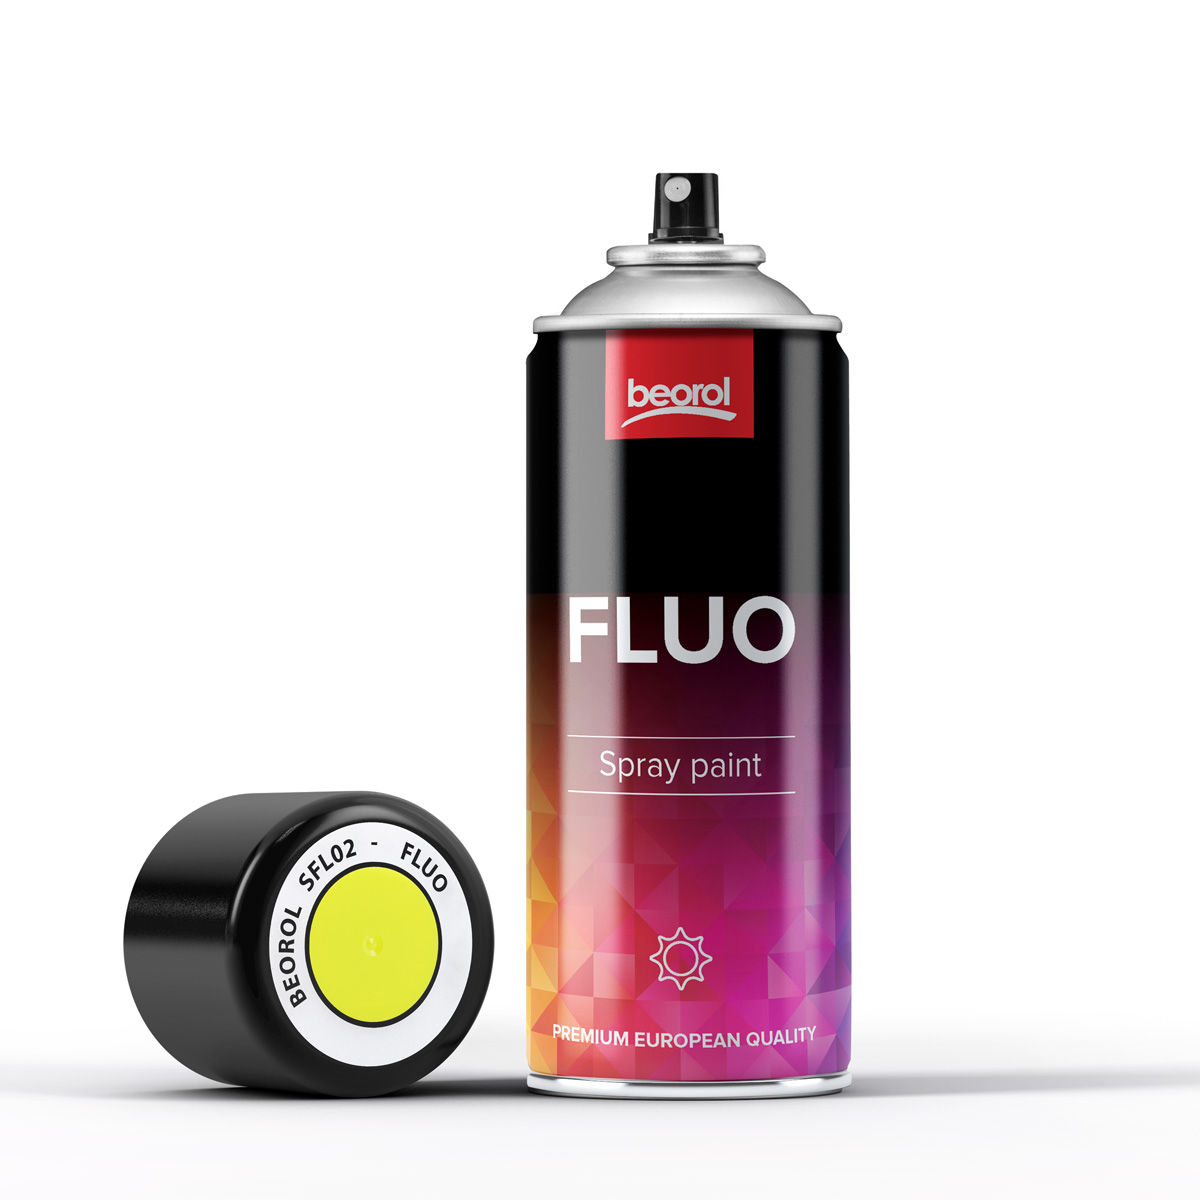 Thermo and fluo sprays